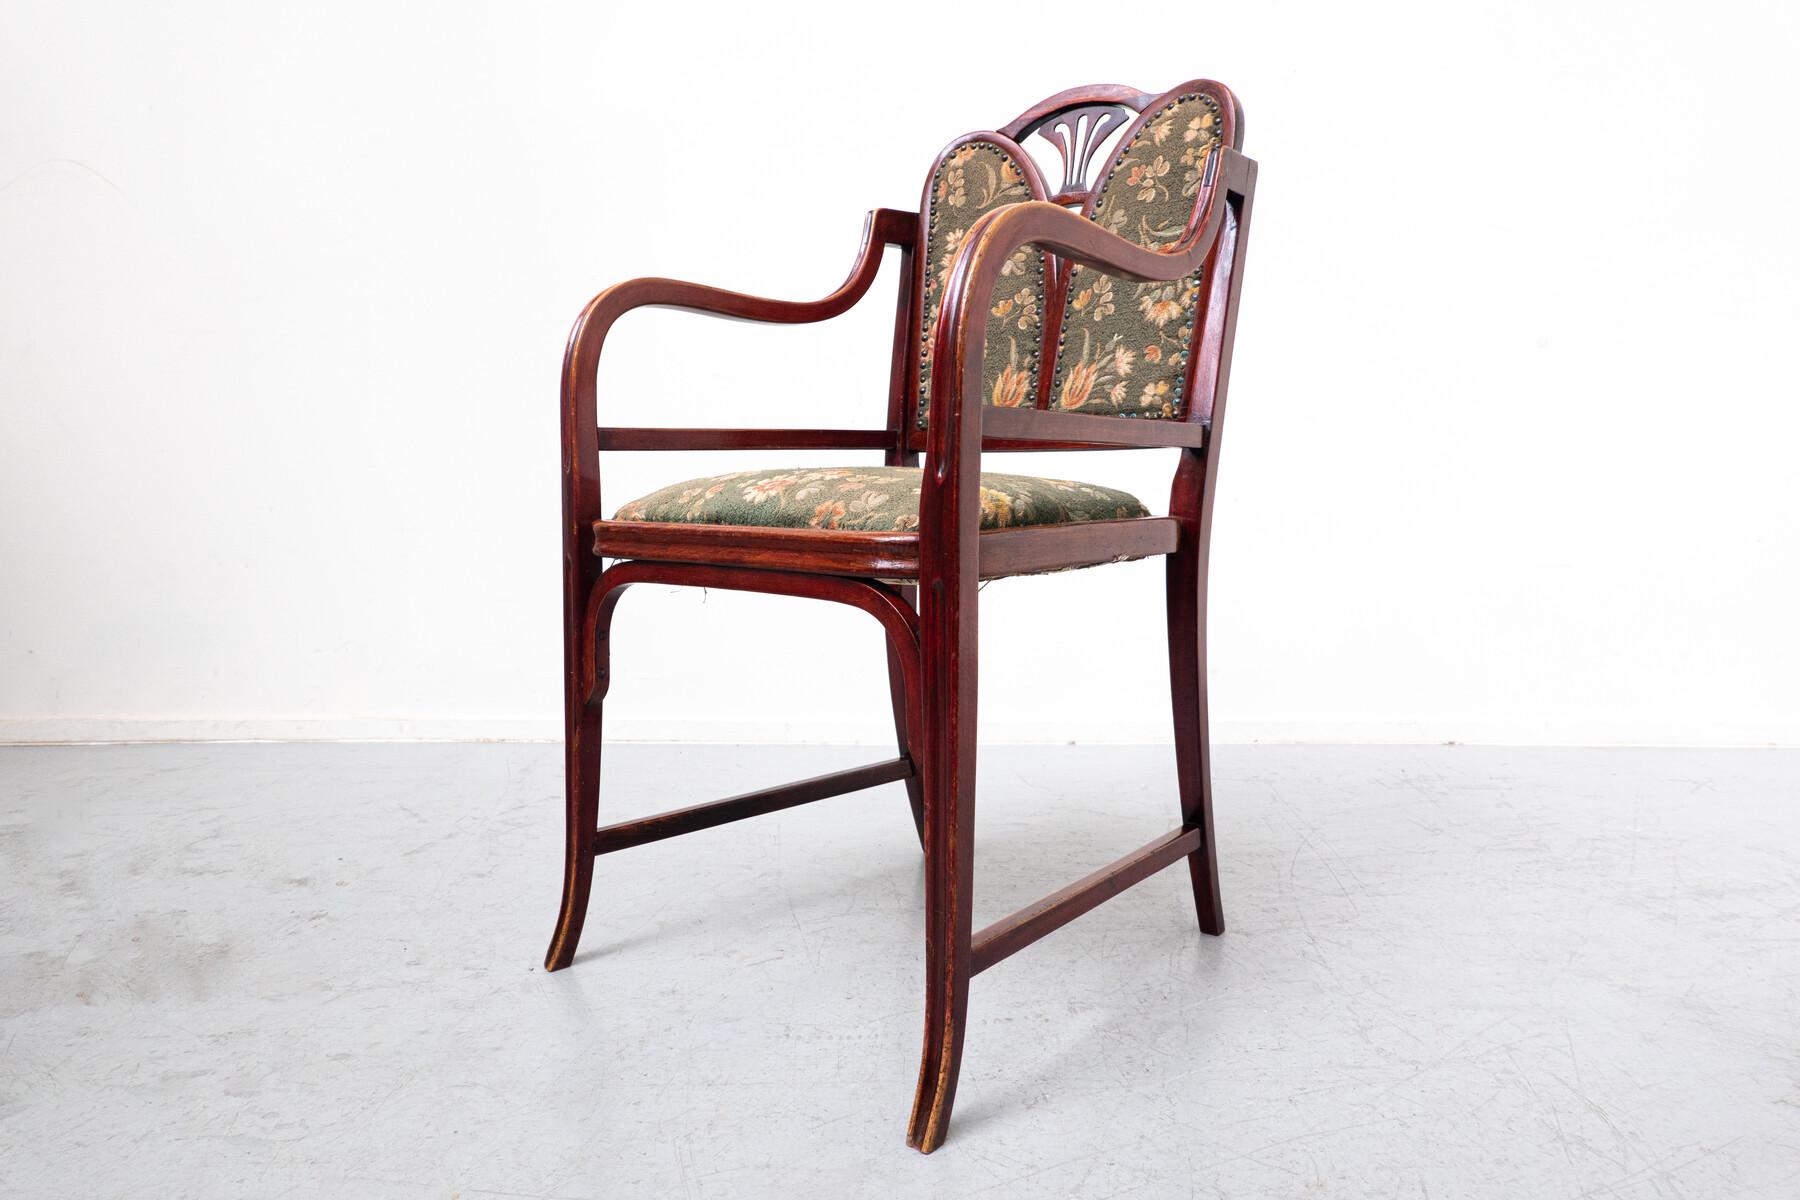 Bentwood armchair by Thonet, Beech and Fabric, 1930s
Europe.